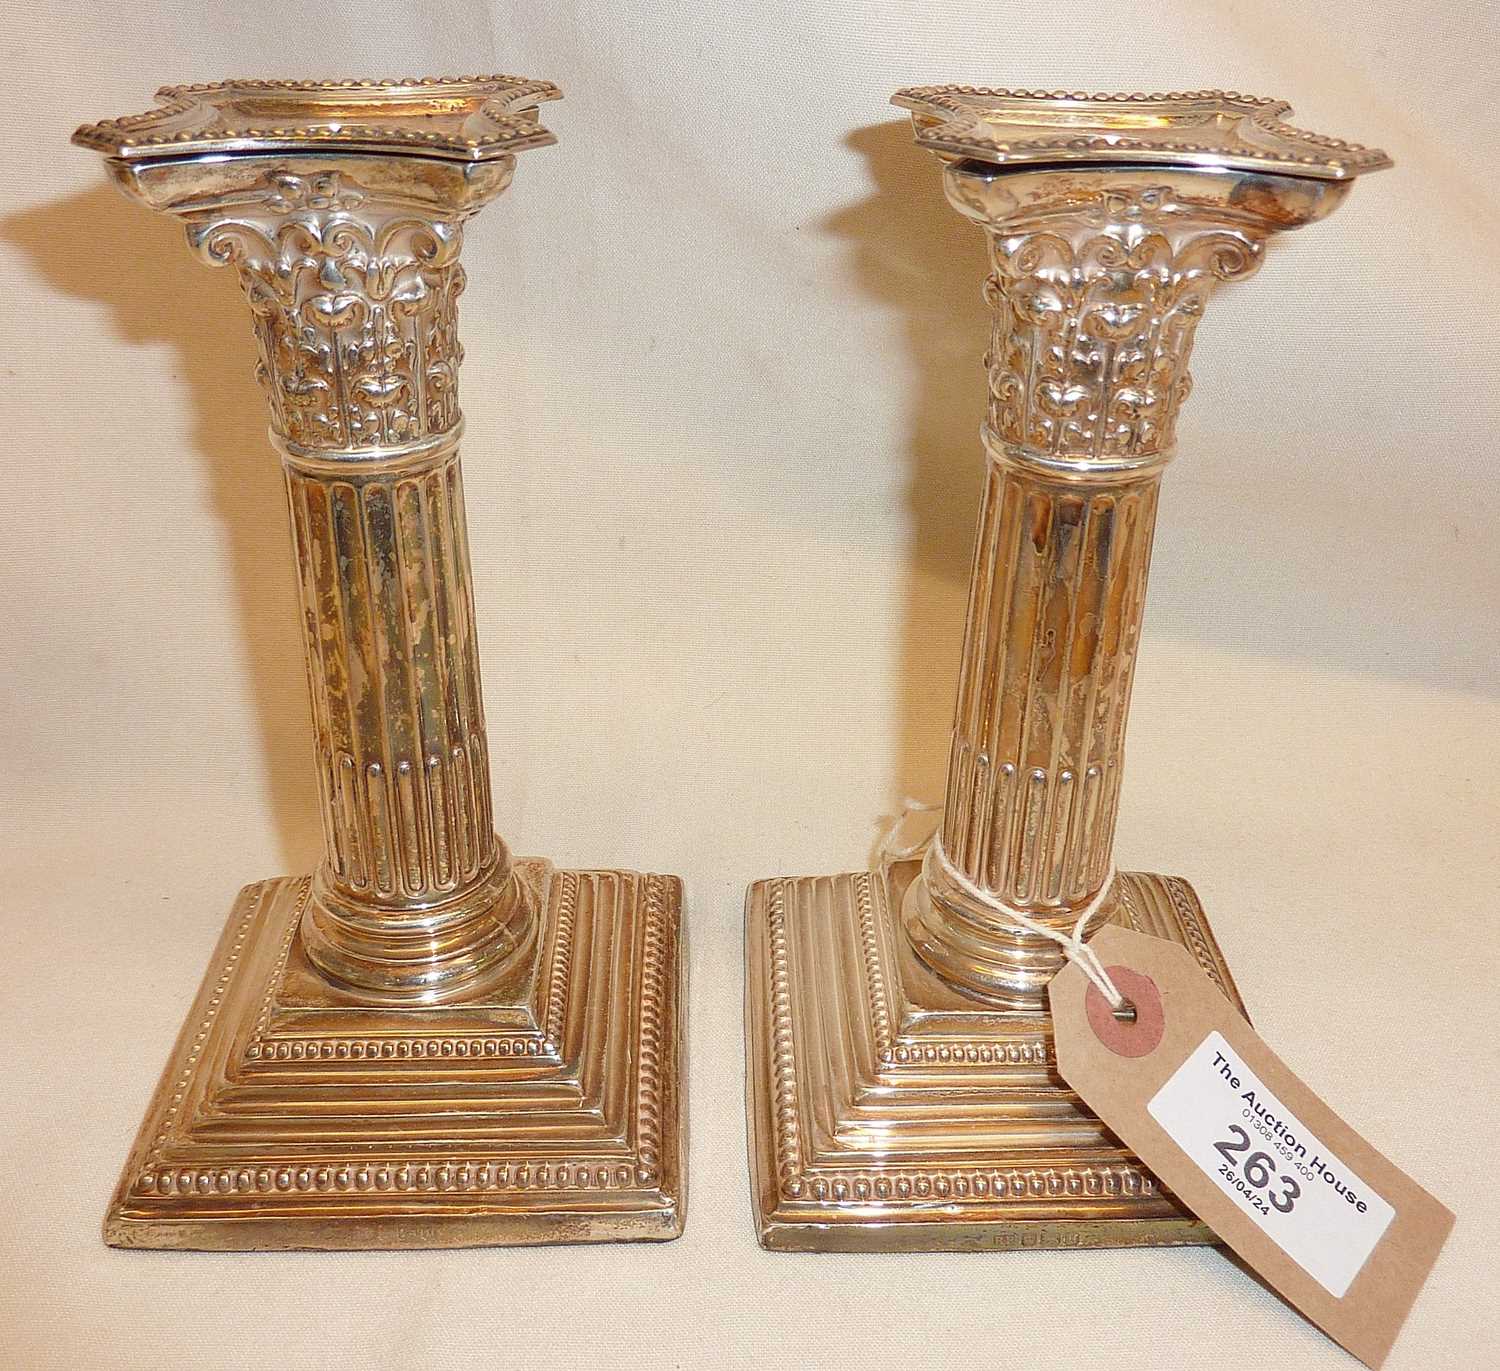 Pair of Edwardian silver columnar candlesticks with weighted bases. Approx. 16cm high and hallmarked